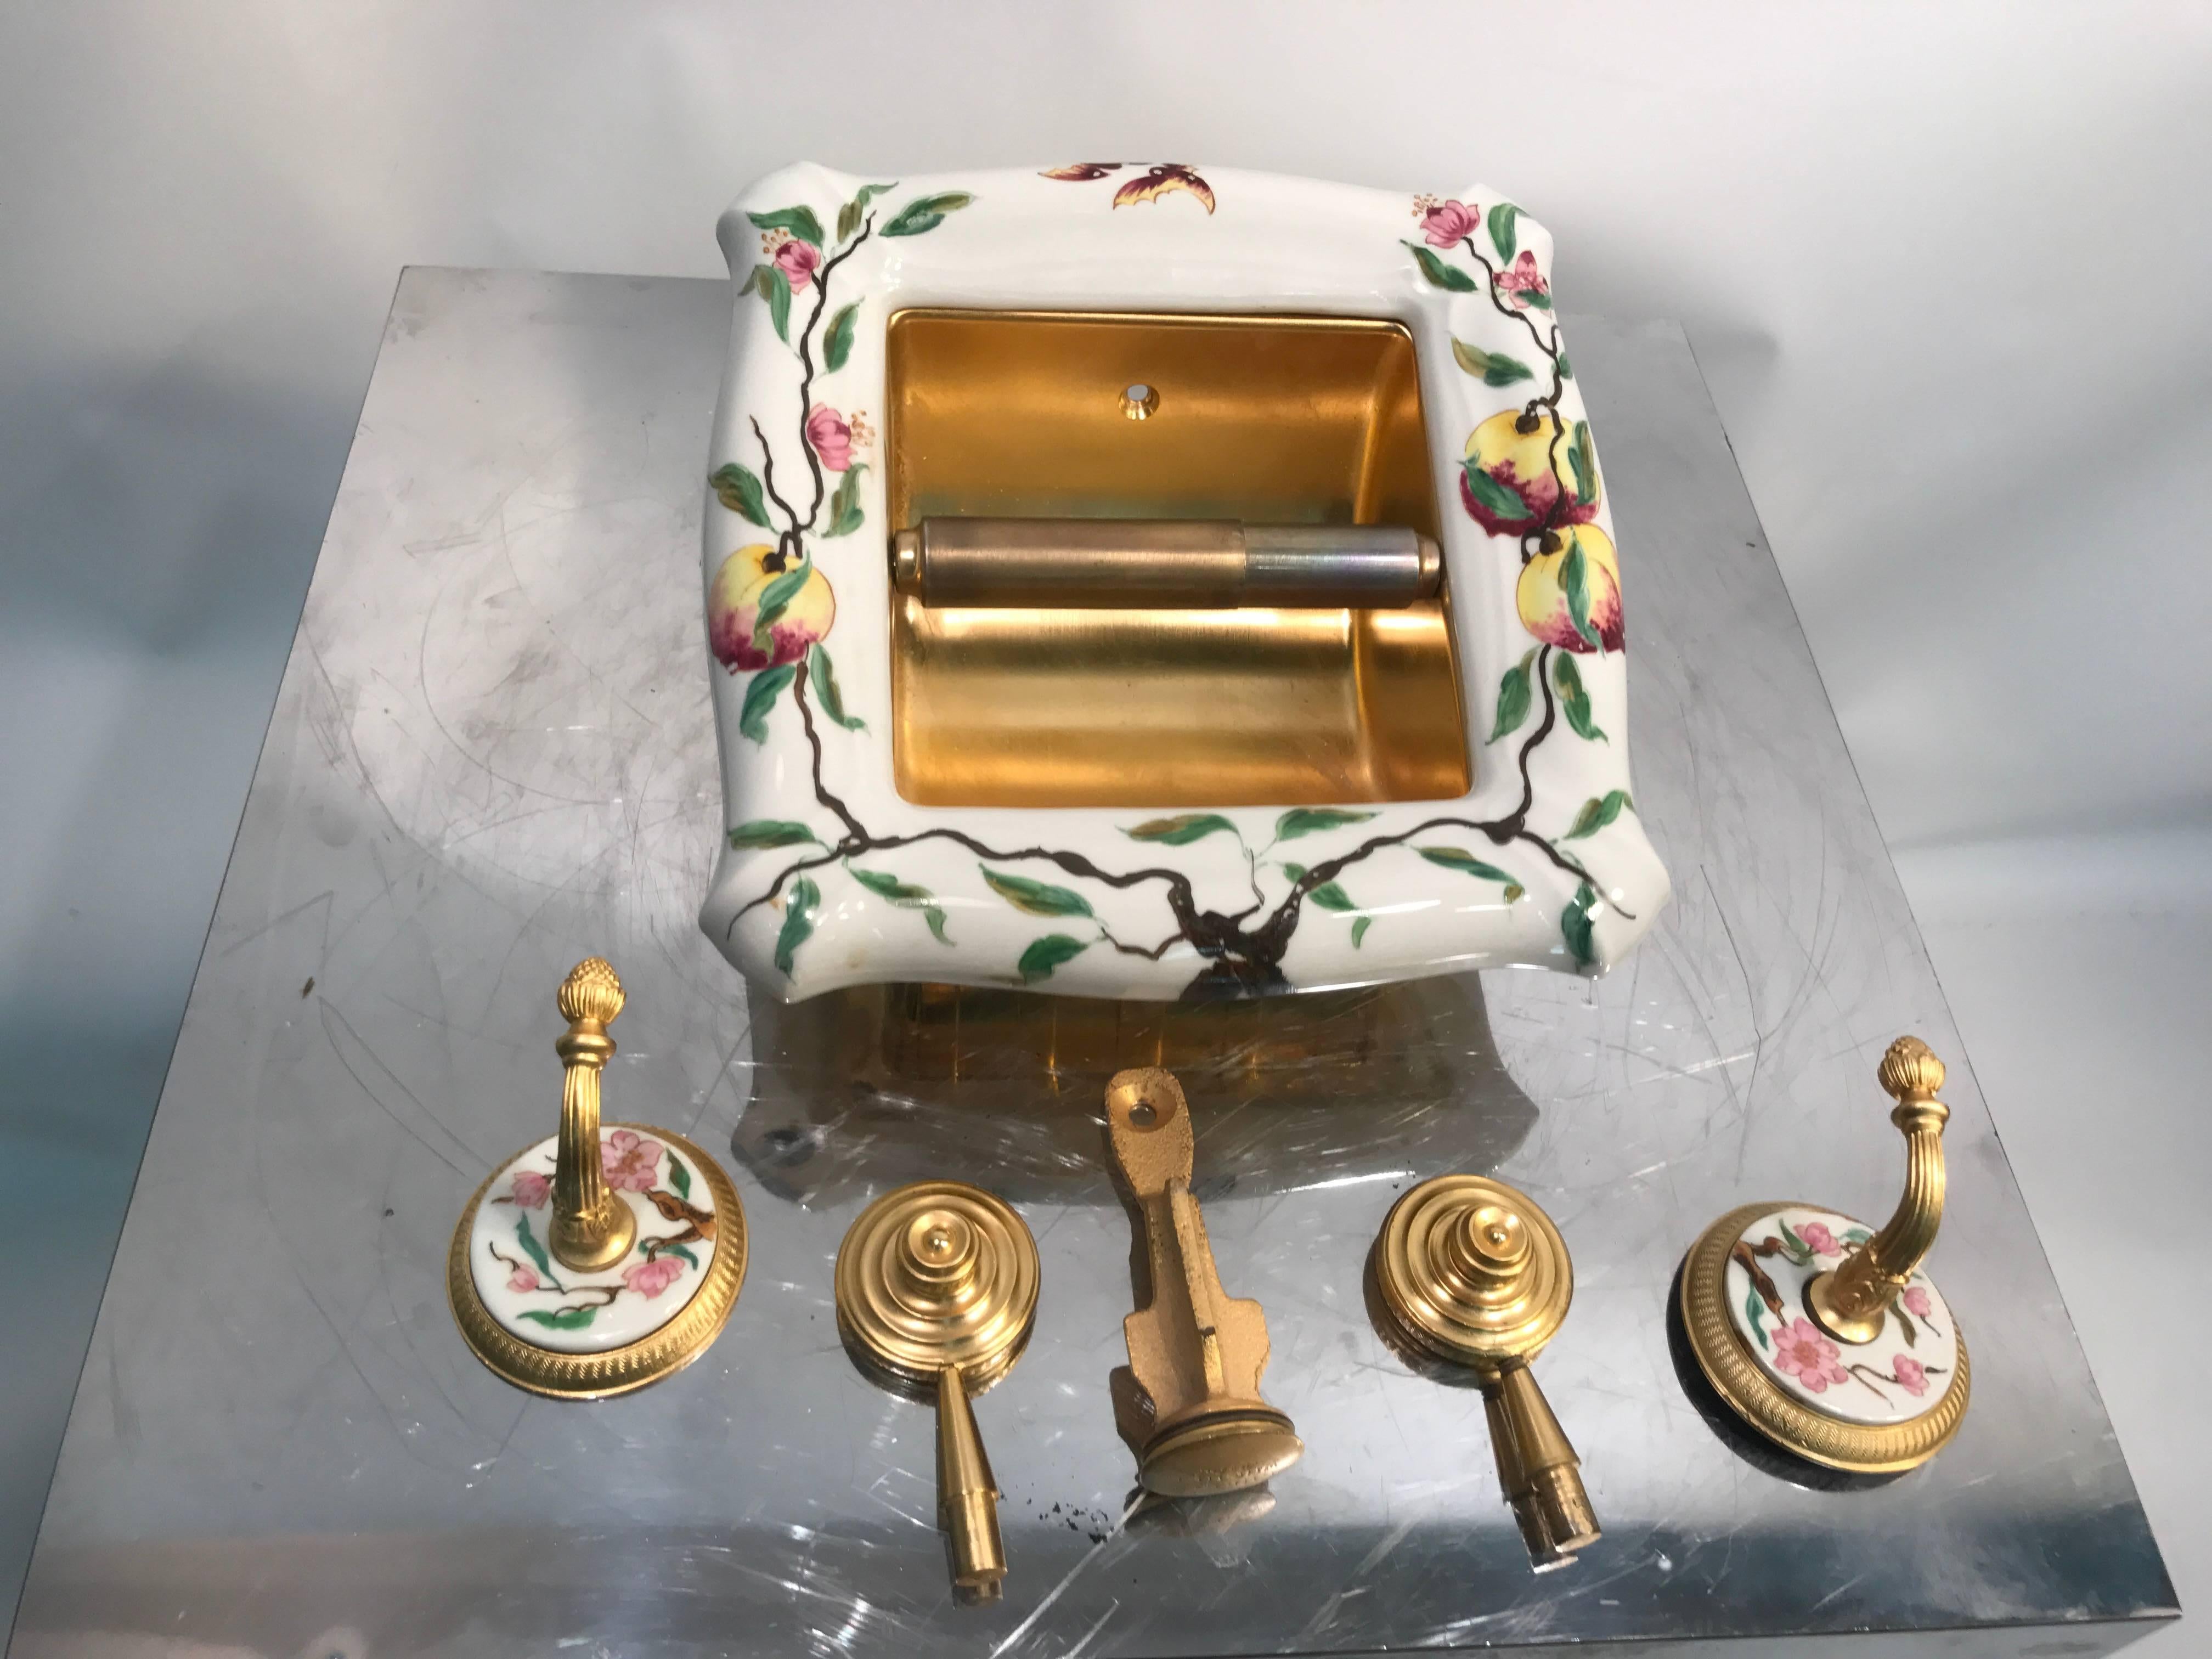 Exceptional Hand-Painted Porcelain & Gilt Bronze Sink with Bathroom Accessories 2